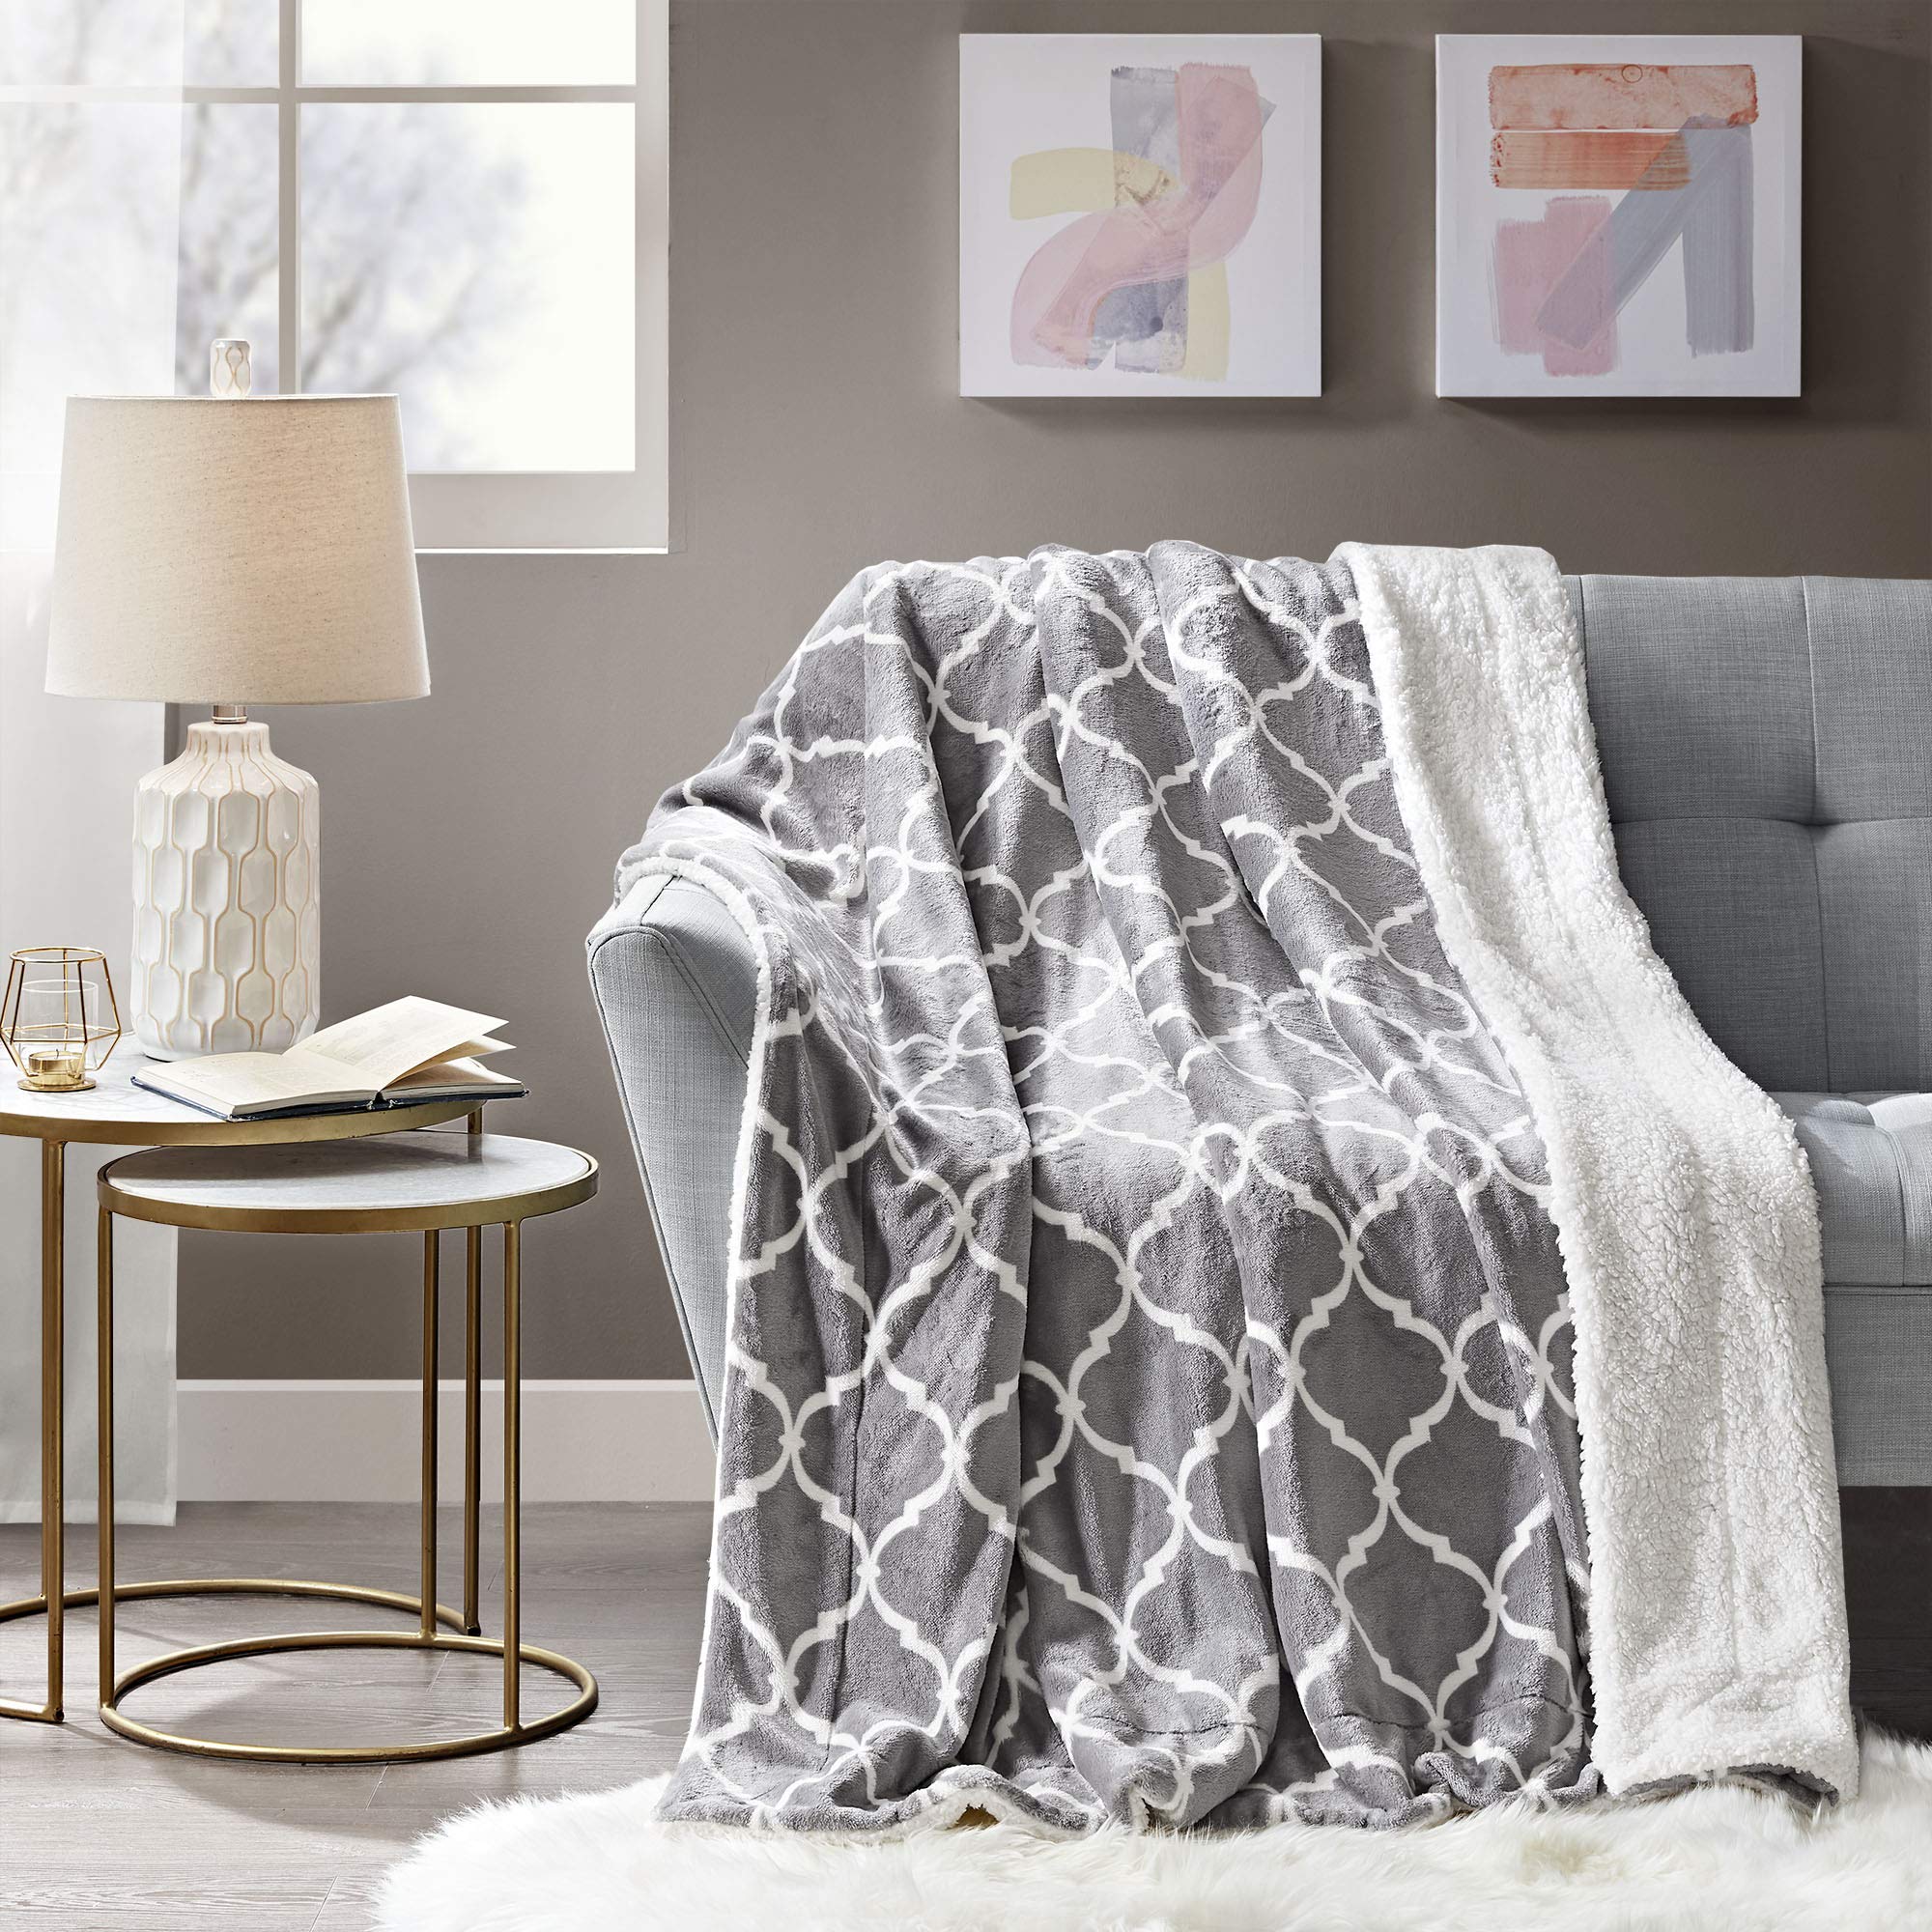 50" x 60" Comfort Spaces Sherpa Reversible Throw Blanket (Grey Ogee) $9 + Free Shipping w/ Prime or on orders over $35